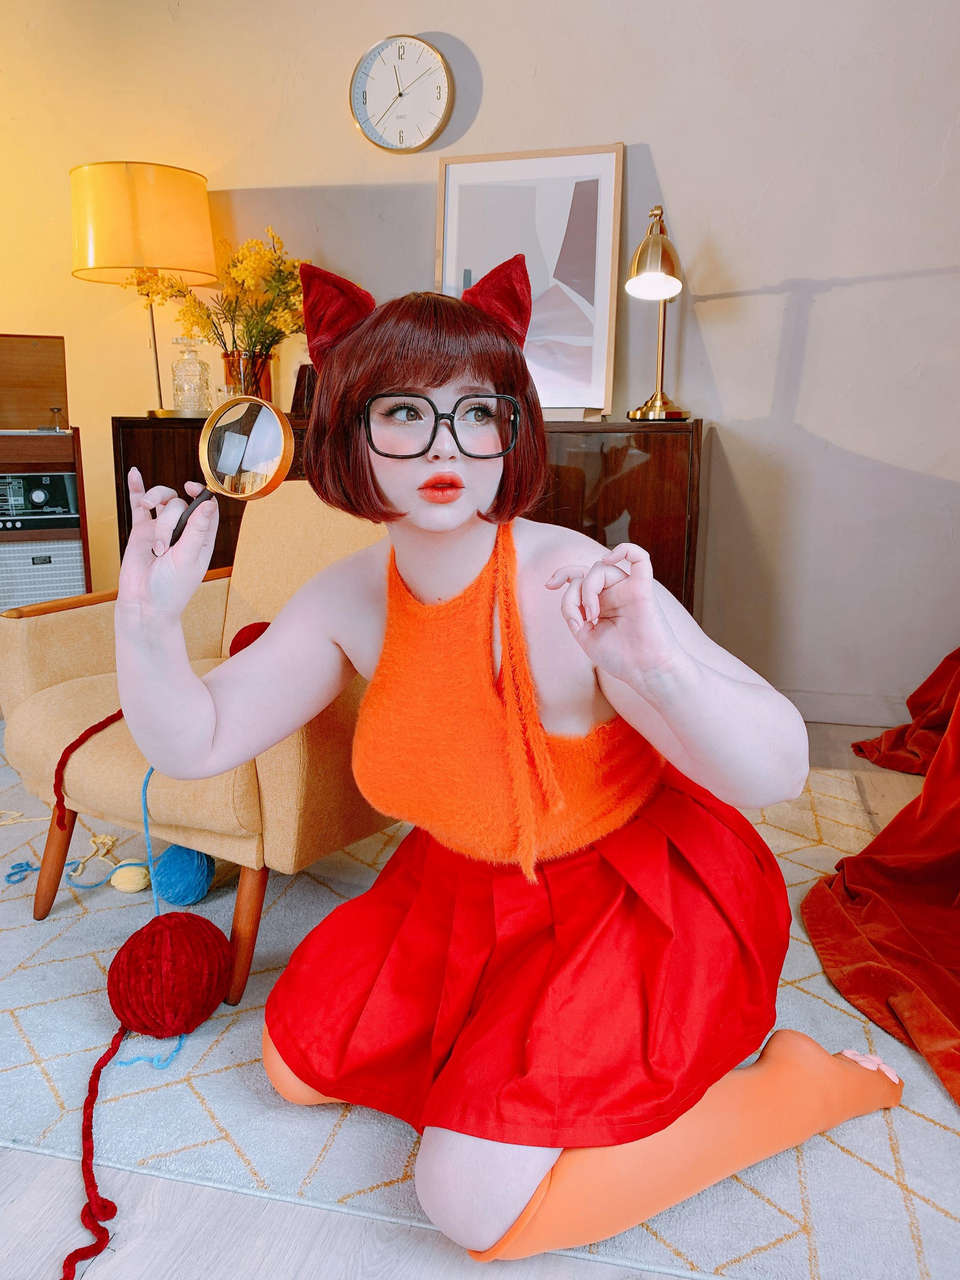 Pawsome Kitty Velma Is Looking For Clues By Venus Blessin